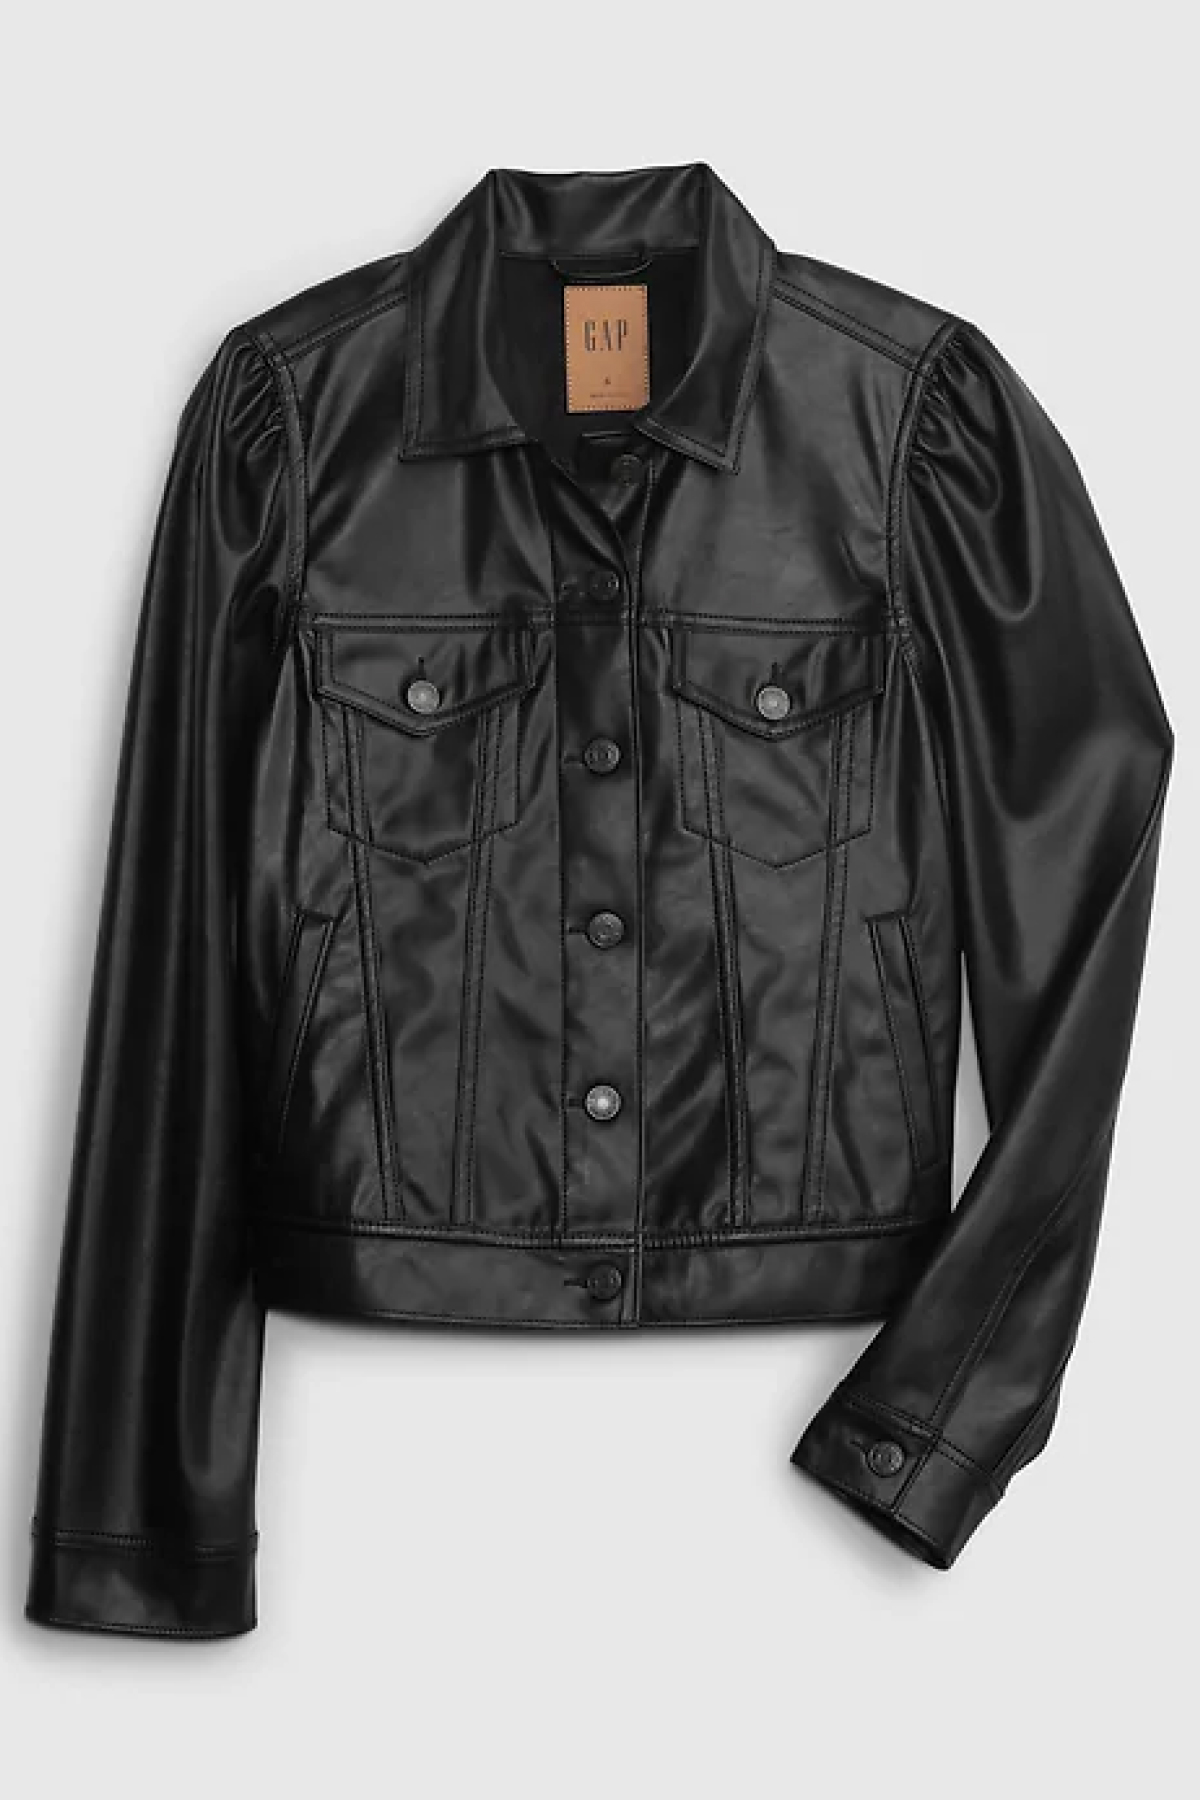 Gucci Leather Jackets for Women, Women's Designer Leather Jackets